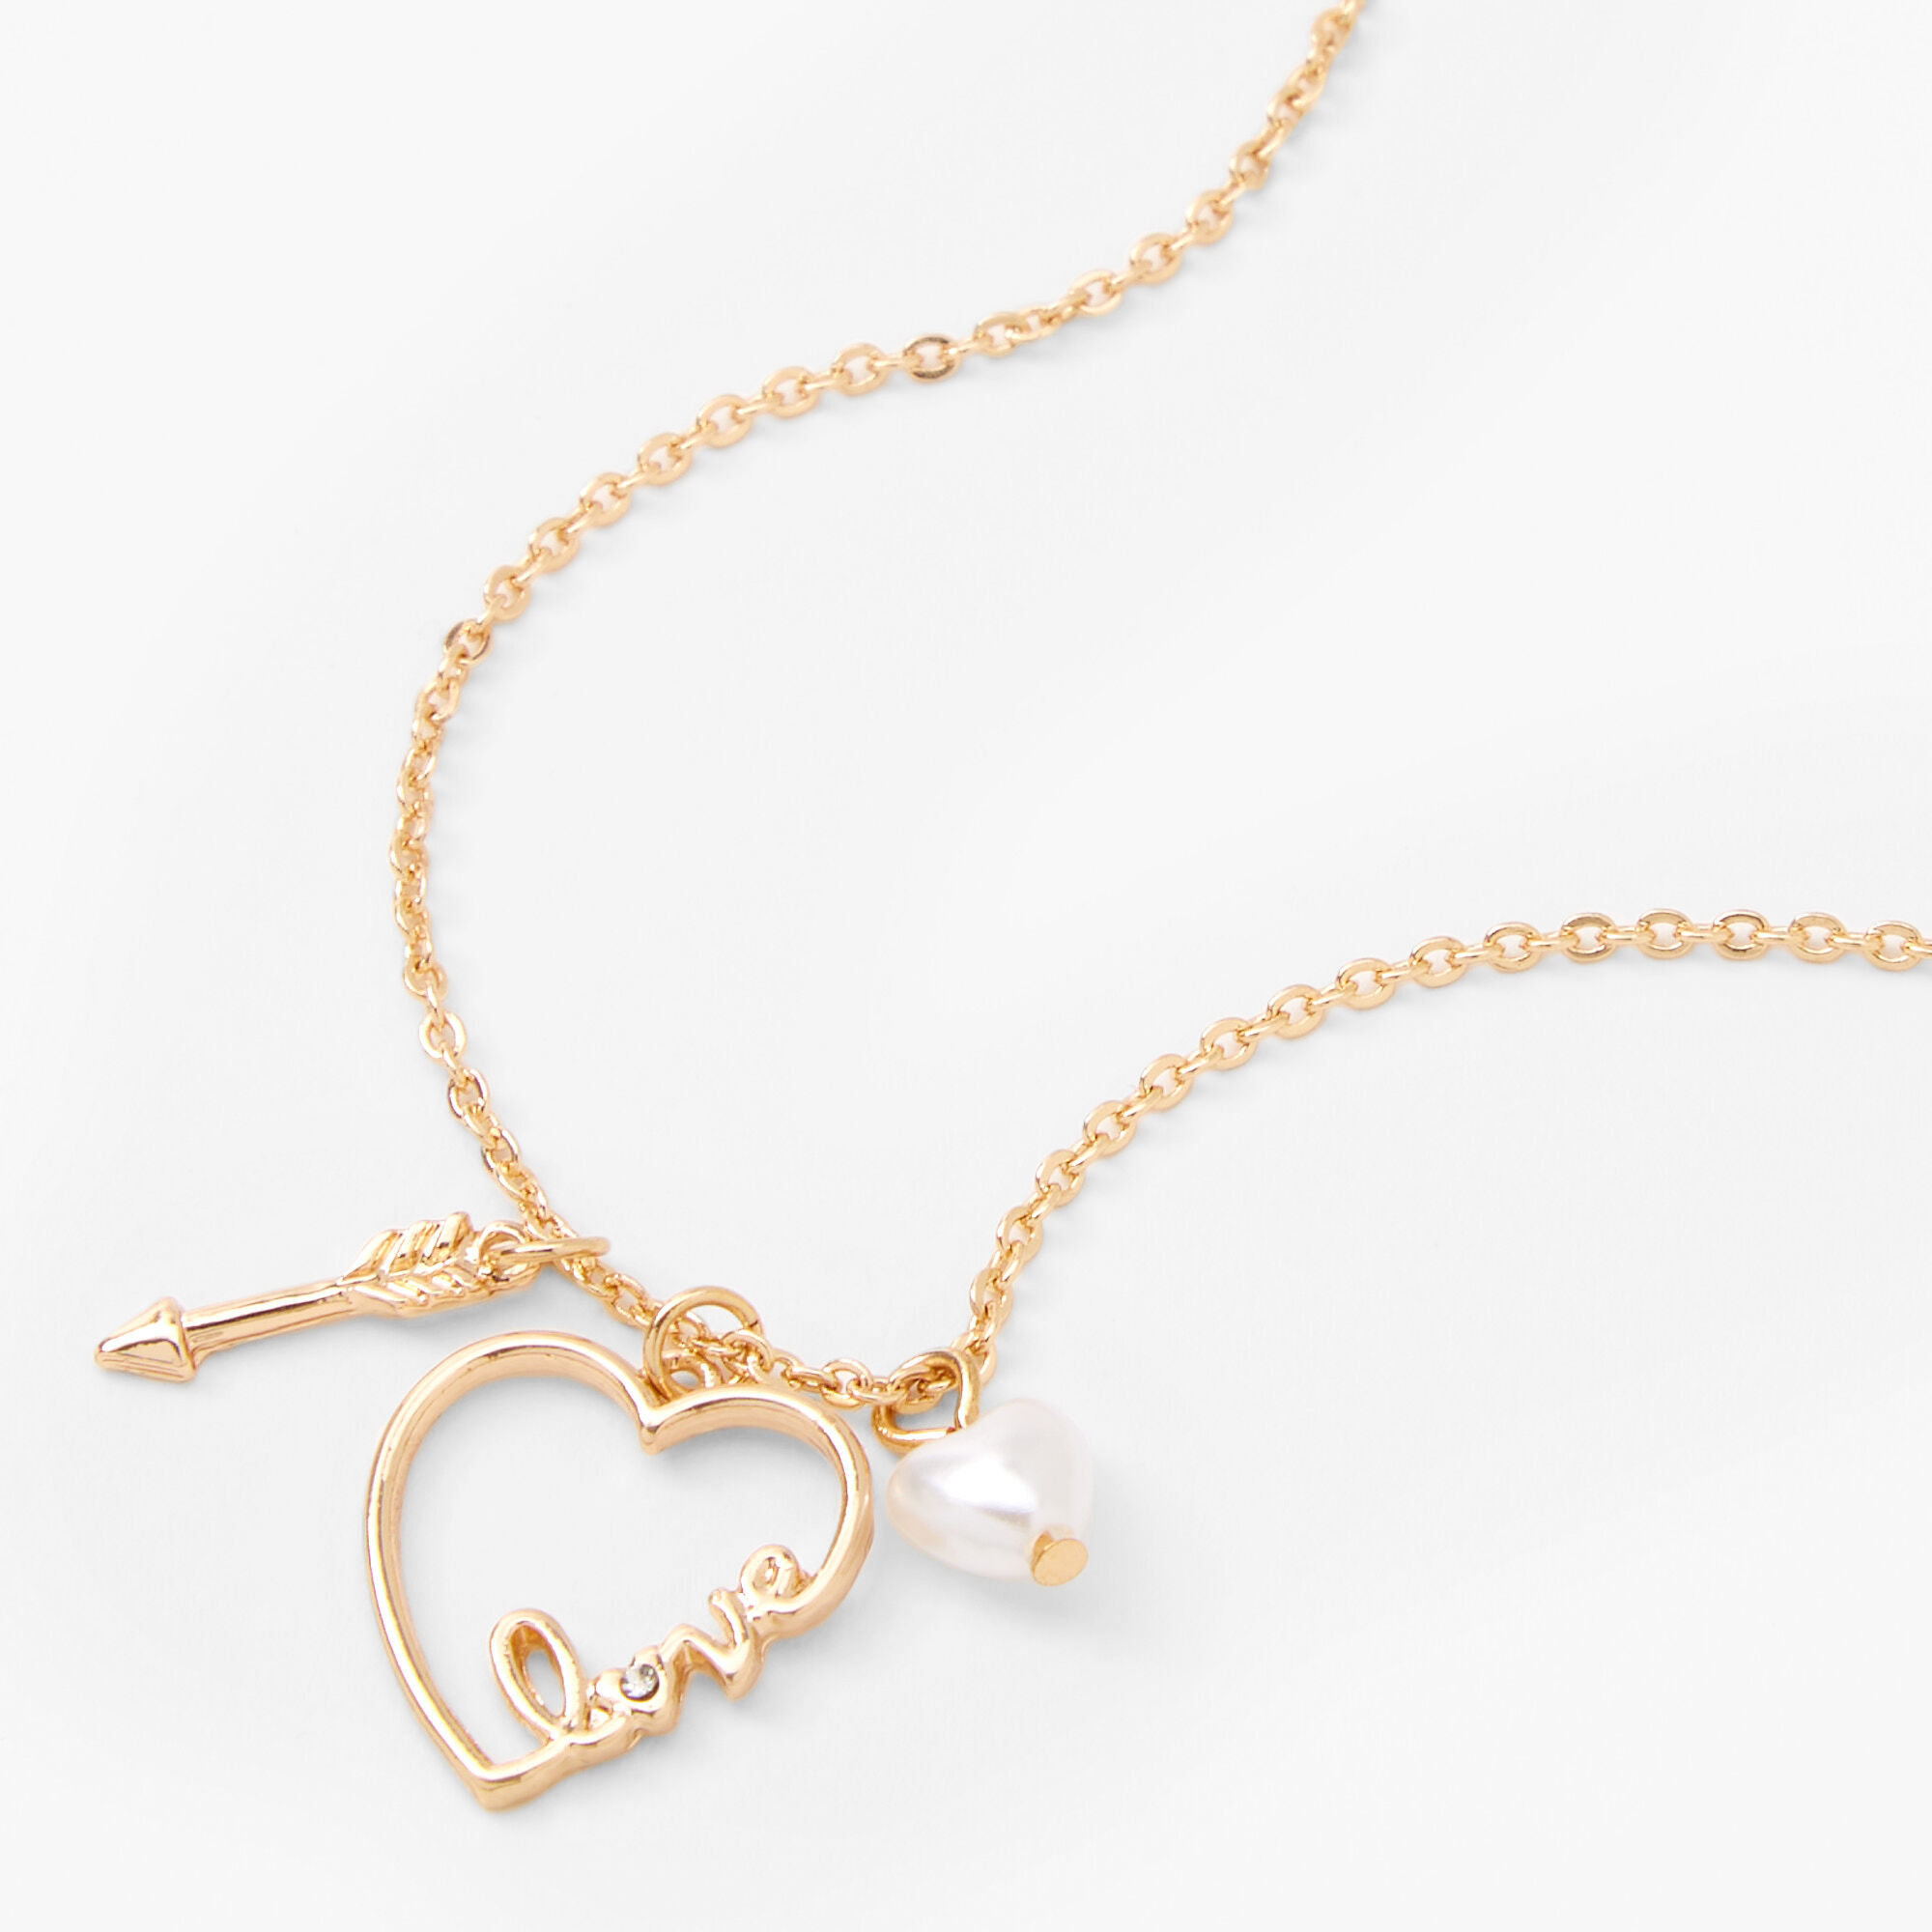 Gold Love Heart Pendant Necklace Icing Us